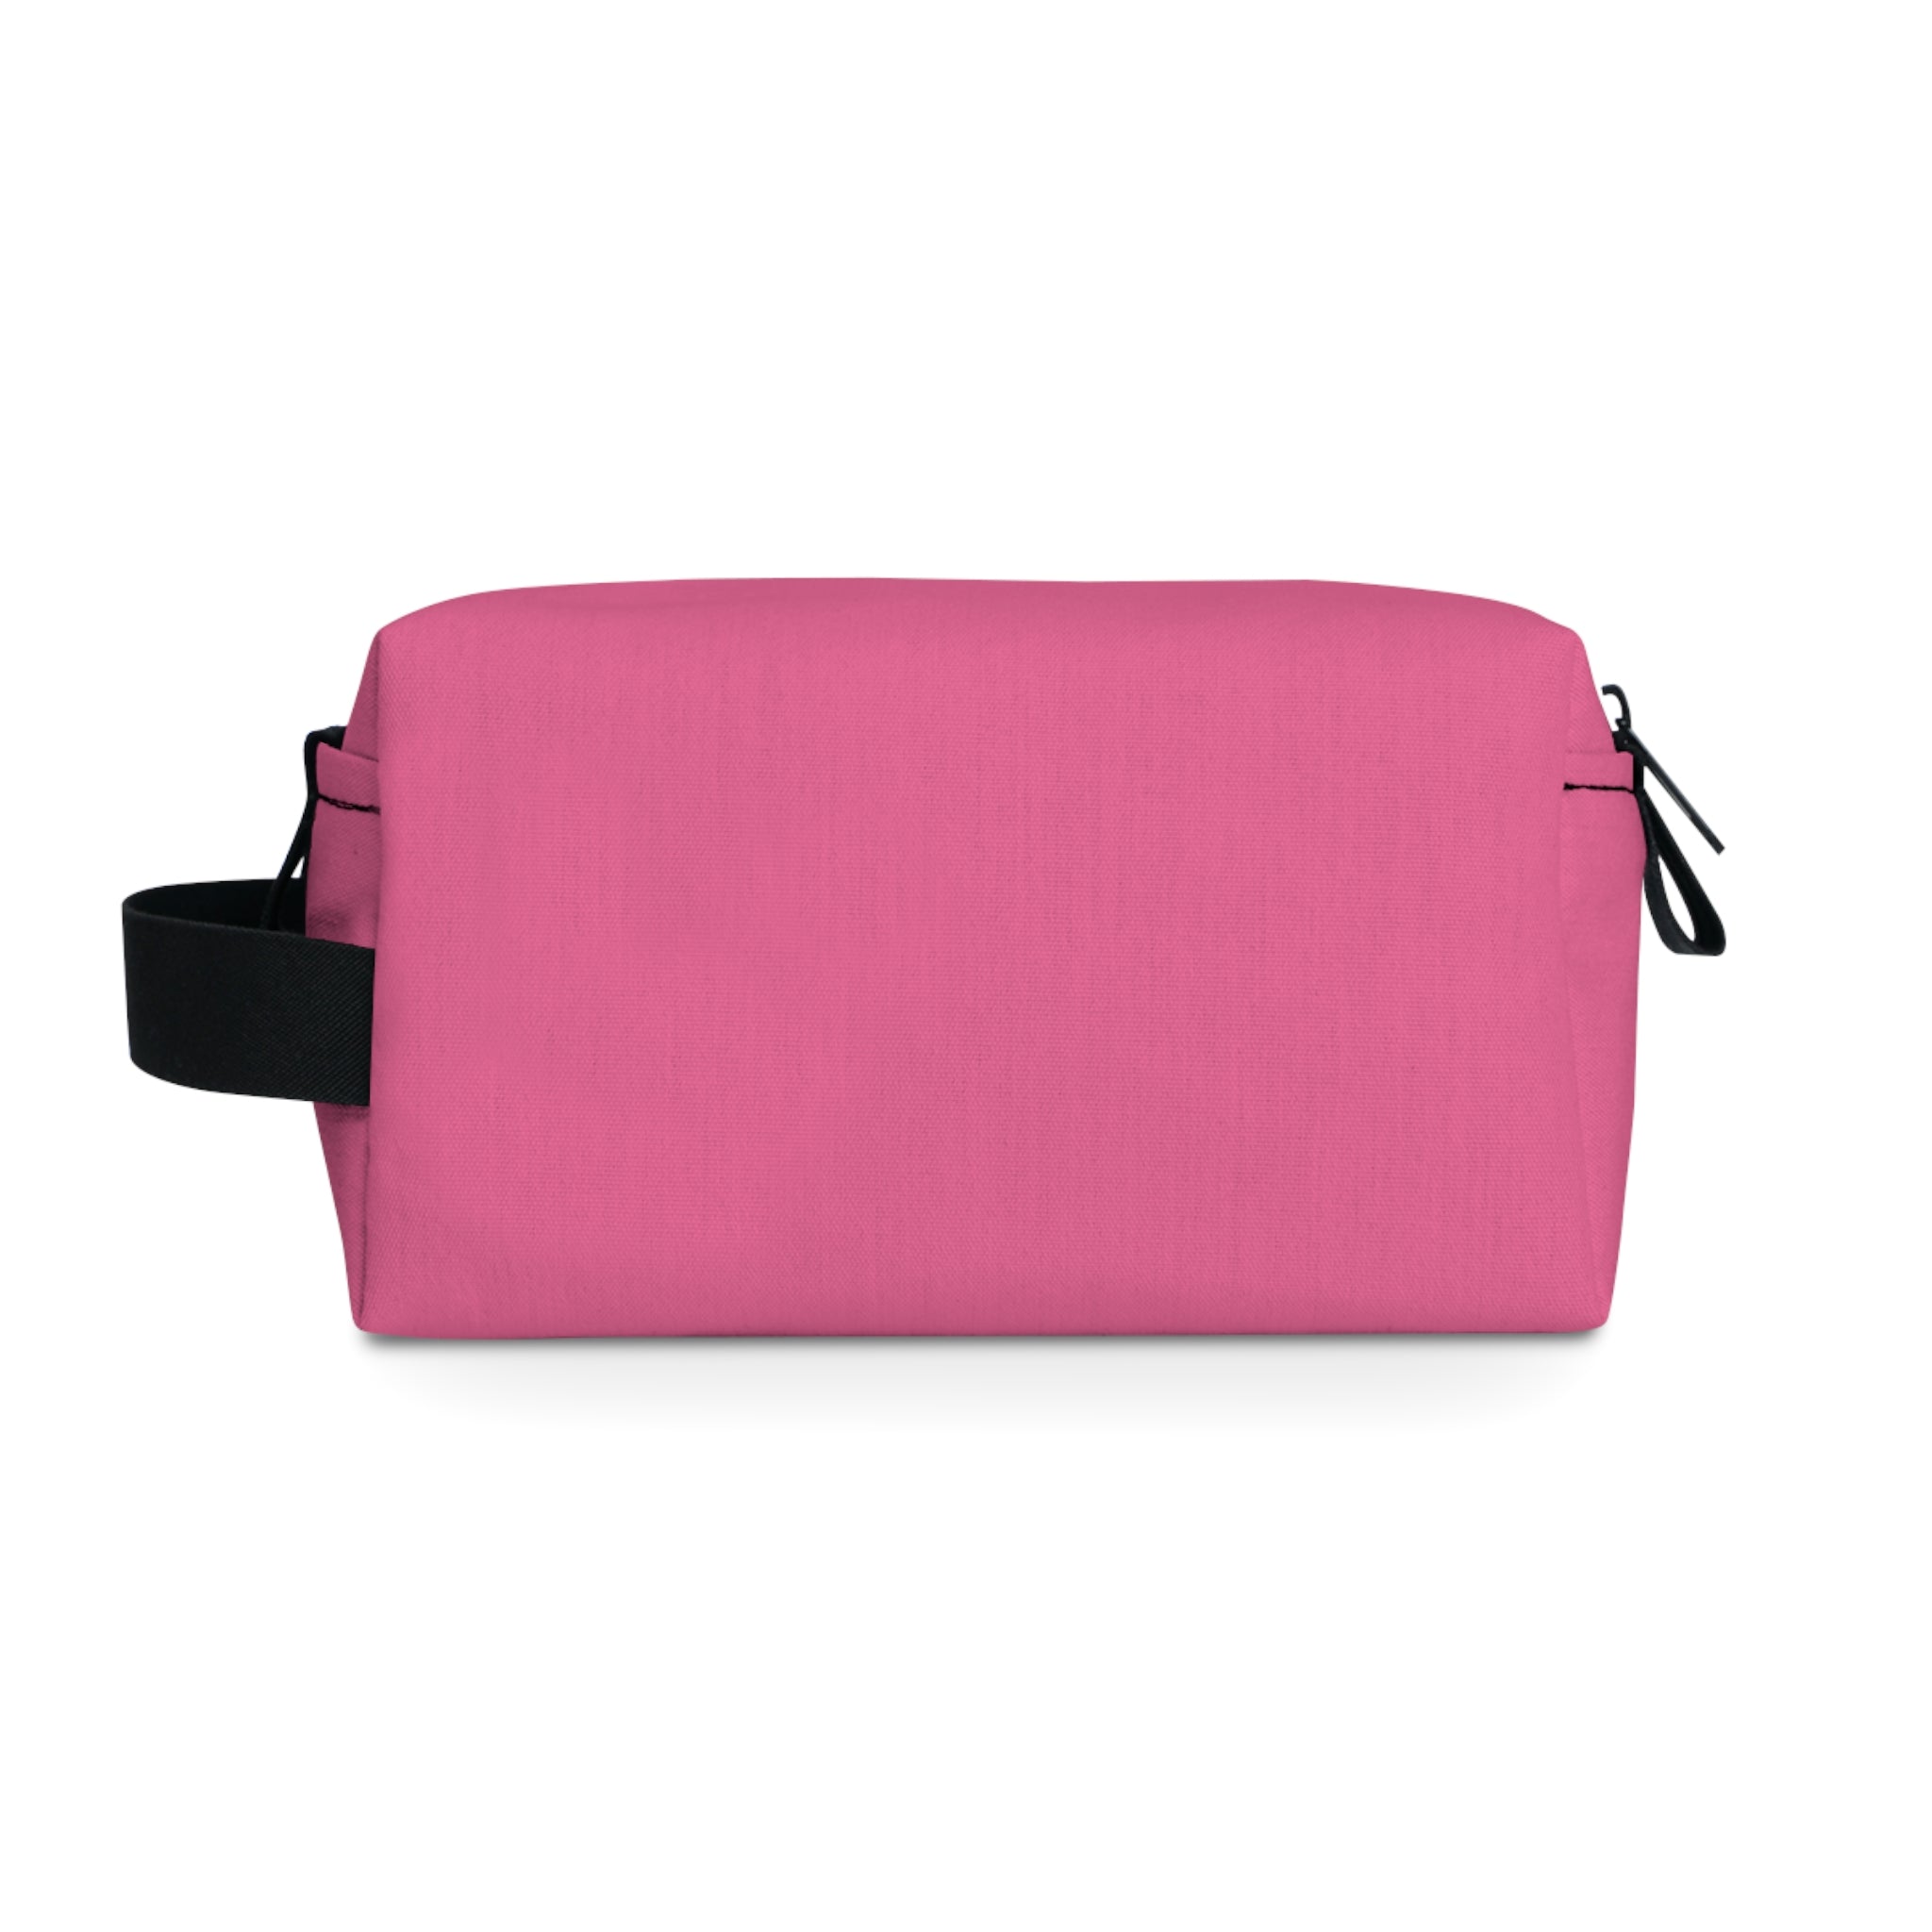 Essential stuff Toiletry Pouch (Pink)